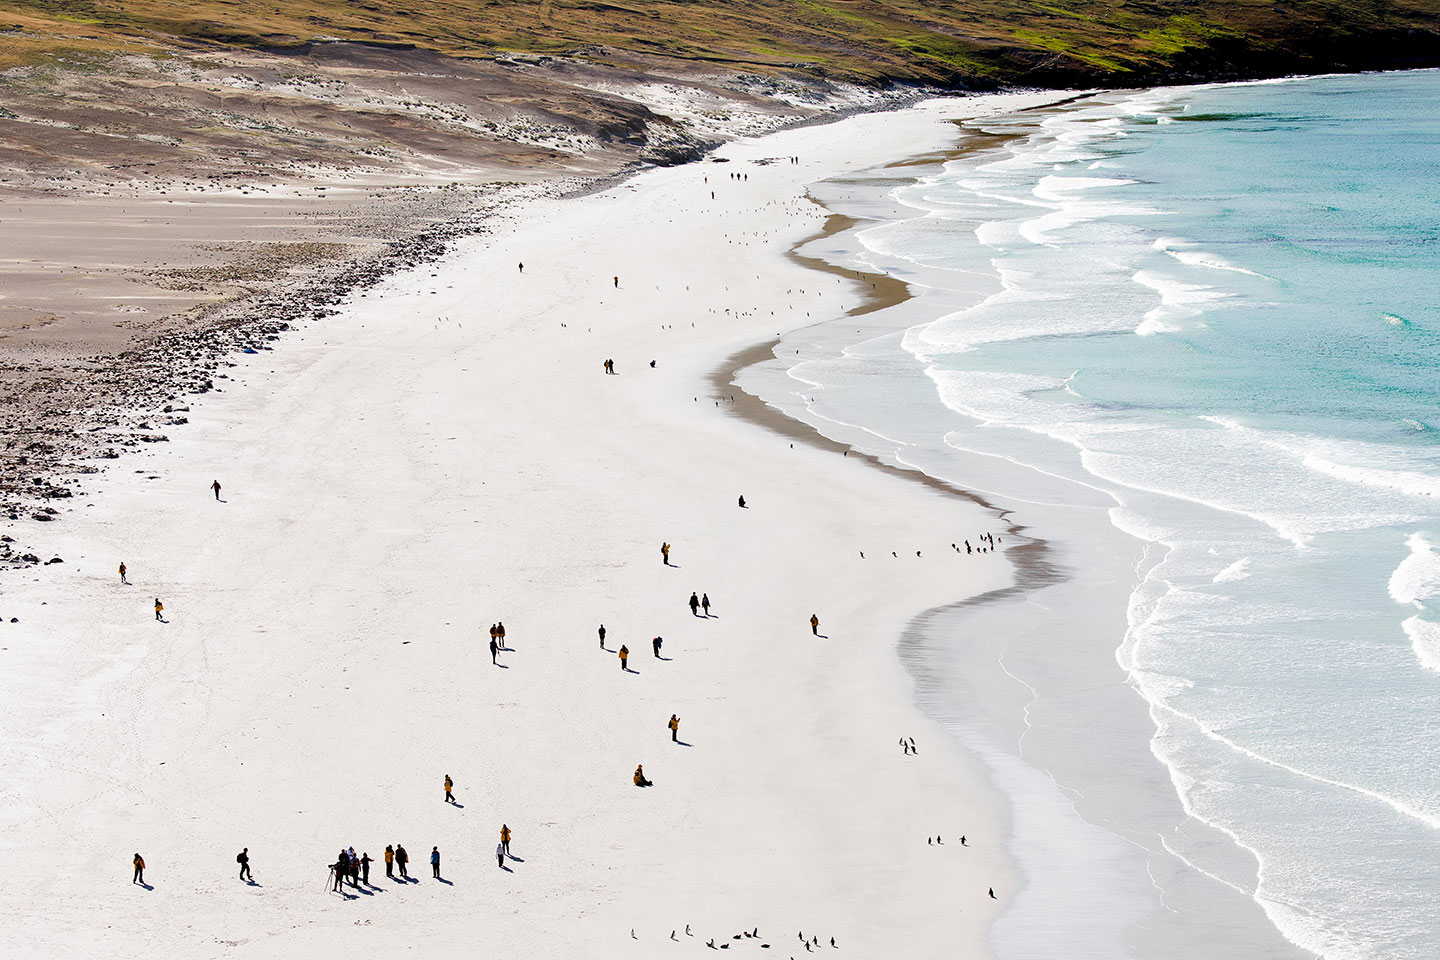 Visitors to the Falkland Islands are often surprised to discover so many sandy beaches on this remote sub-Antarctic island